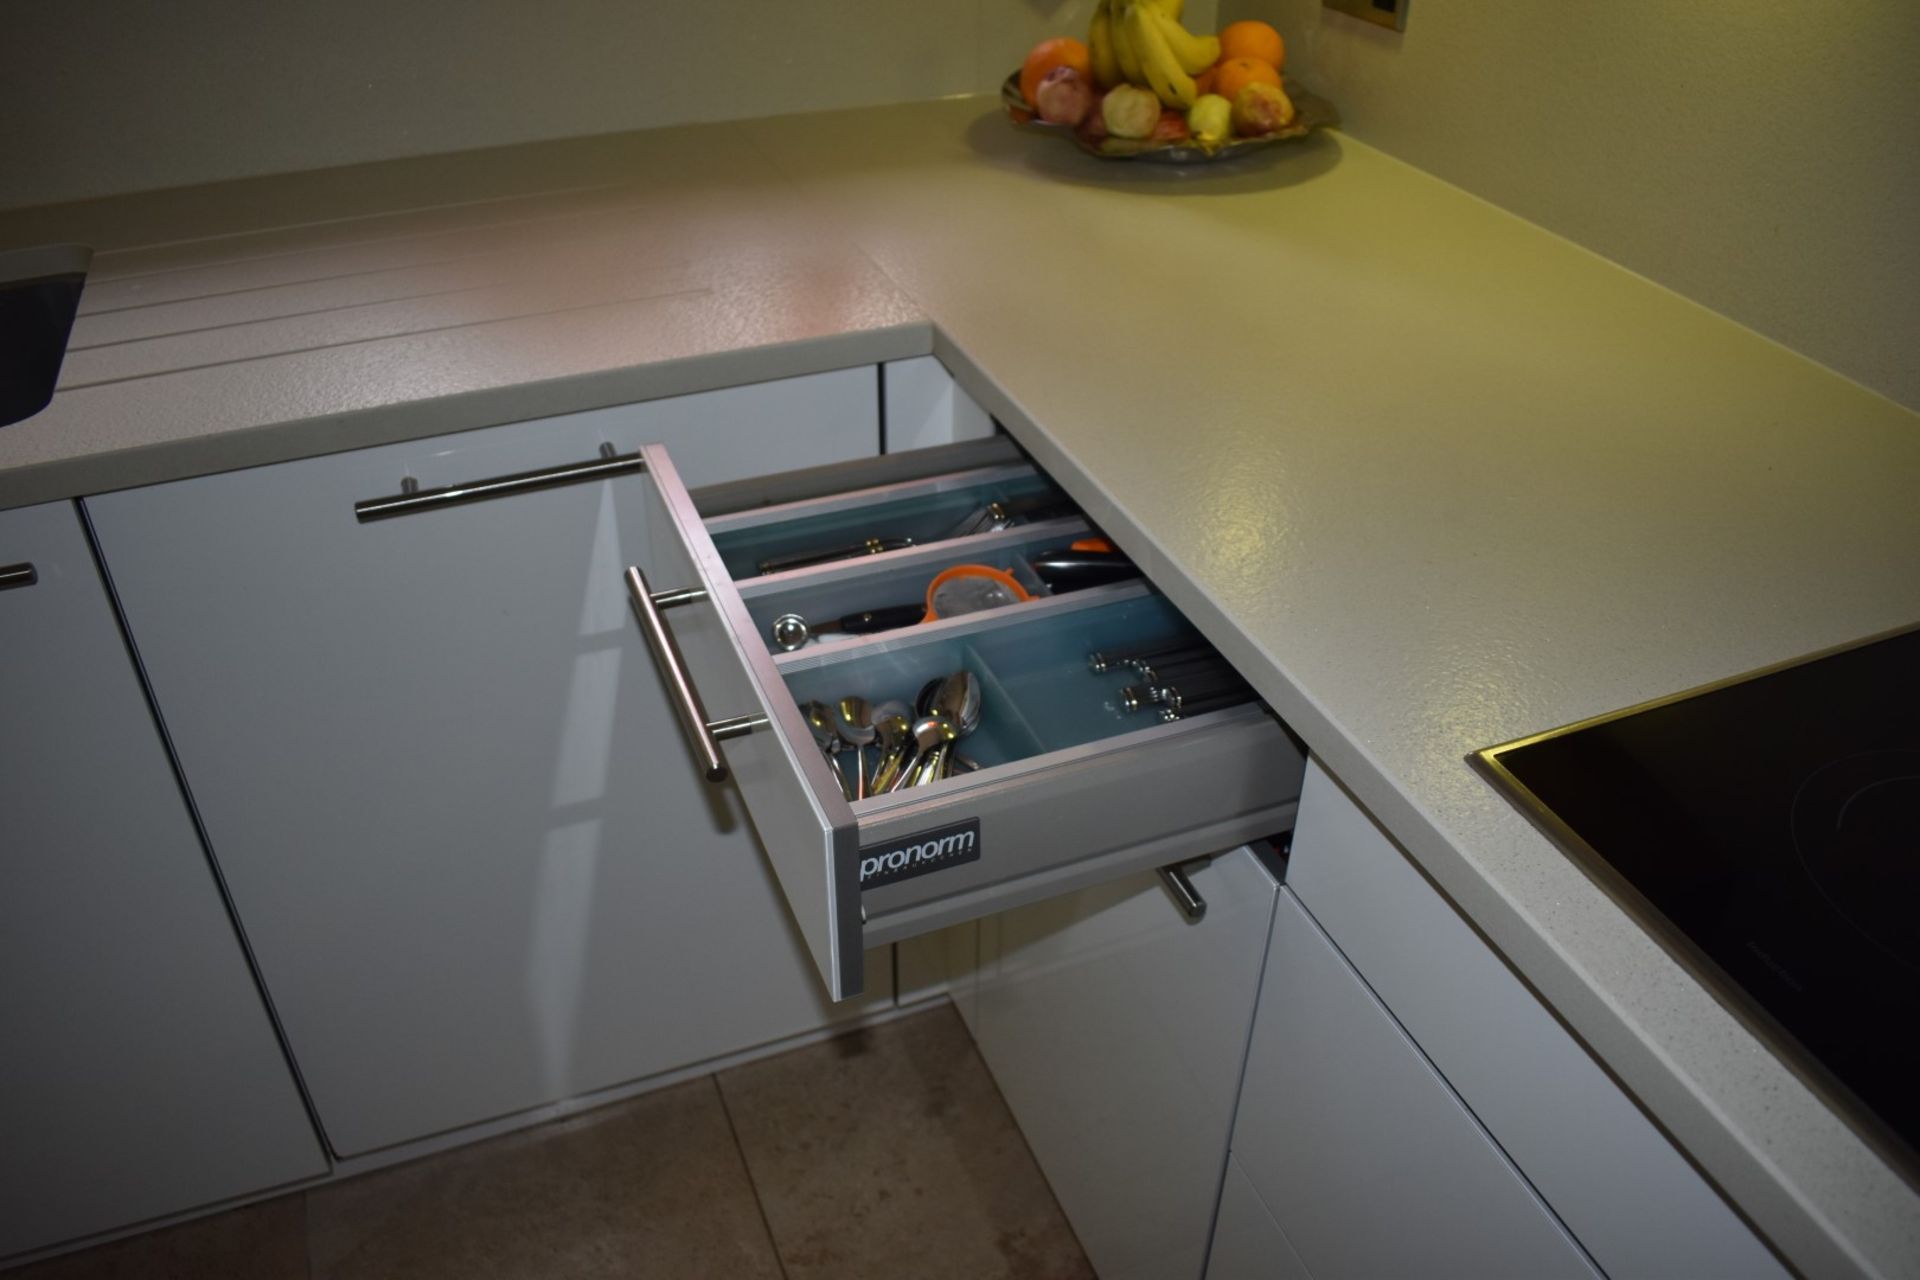 1 x Pronorm Einbauküchen German Made Fitted Kitchen With Contemporary High Gloss Cream Doors and - Image 10 of 51